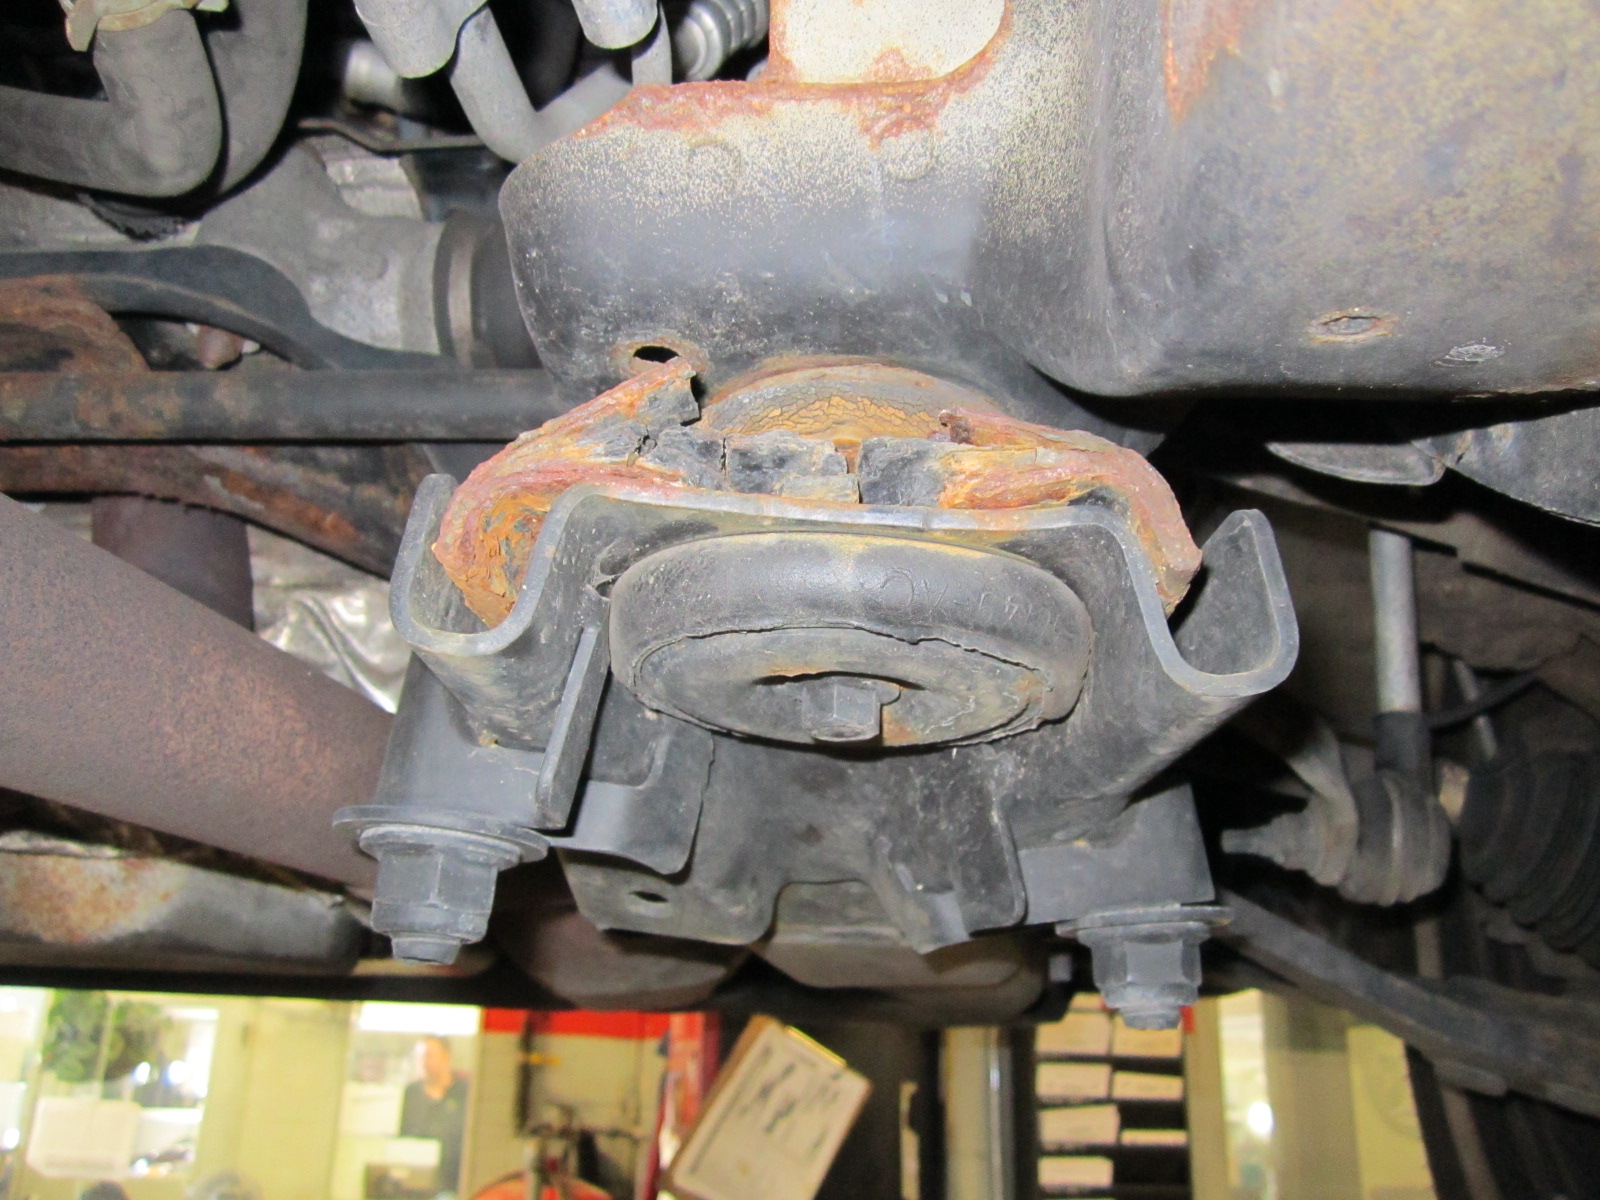 2001 Ford windstar subframe recall #7